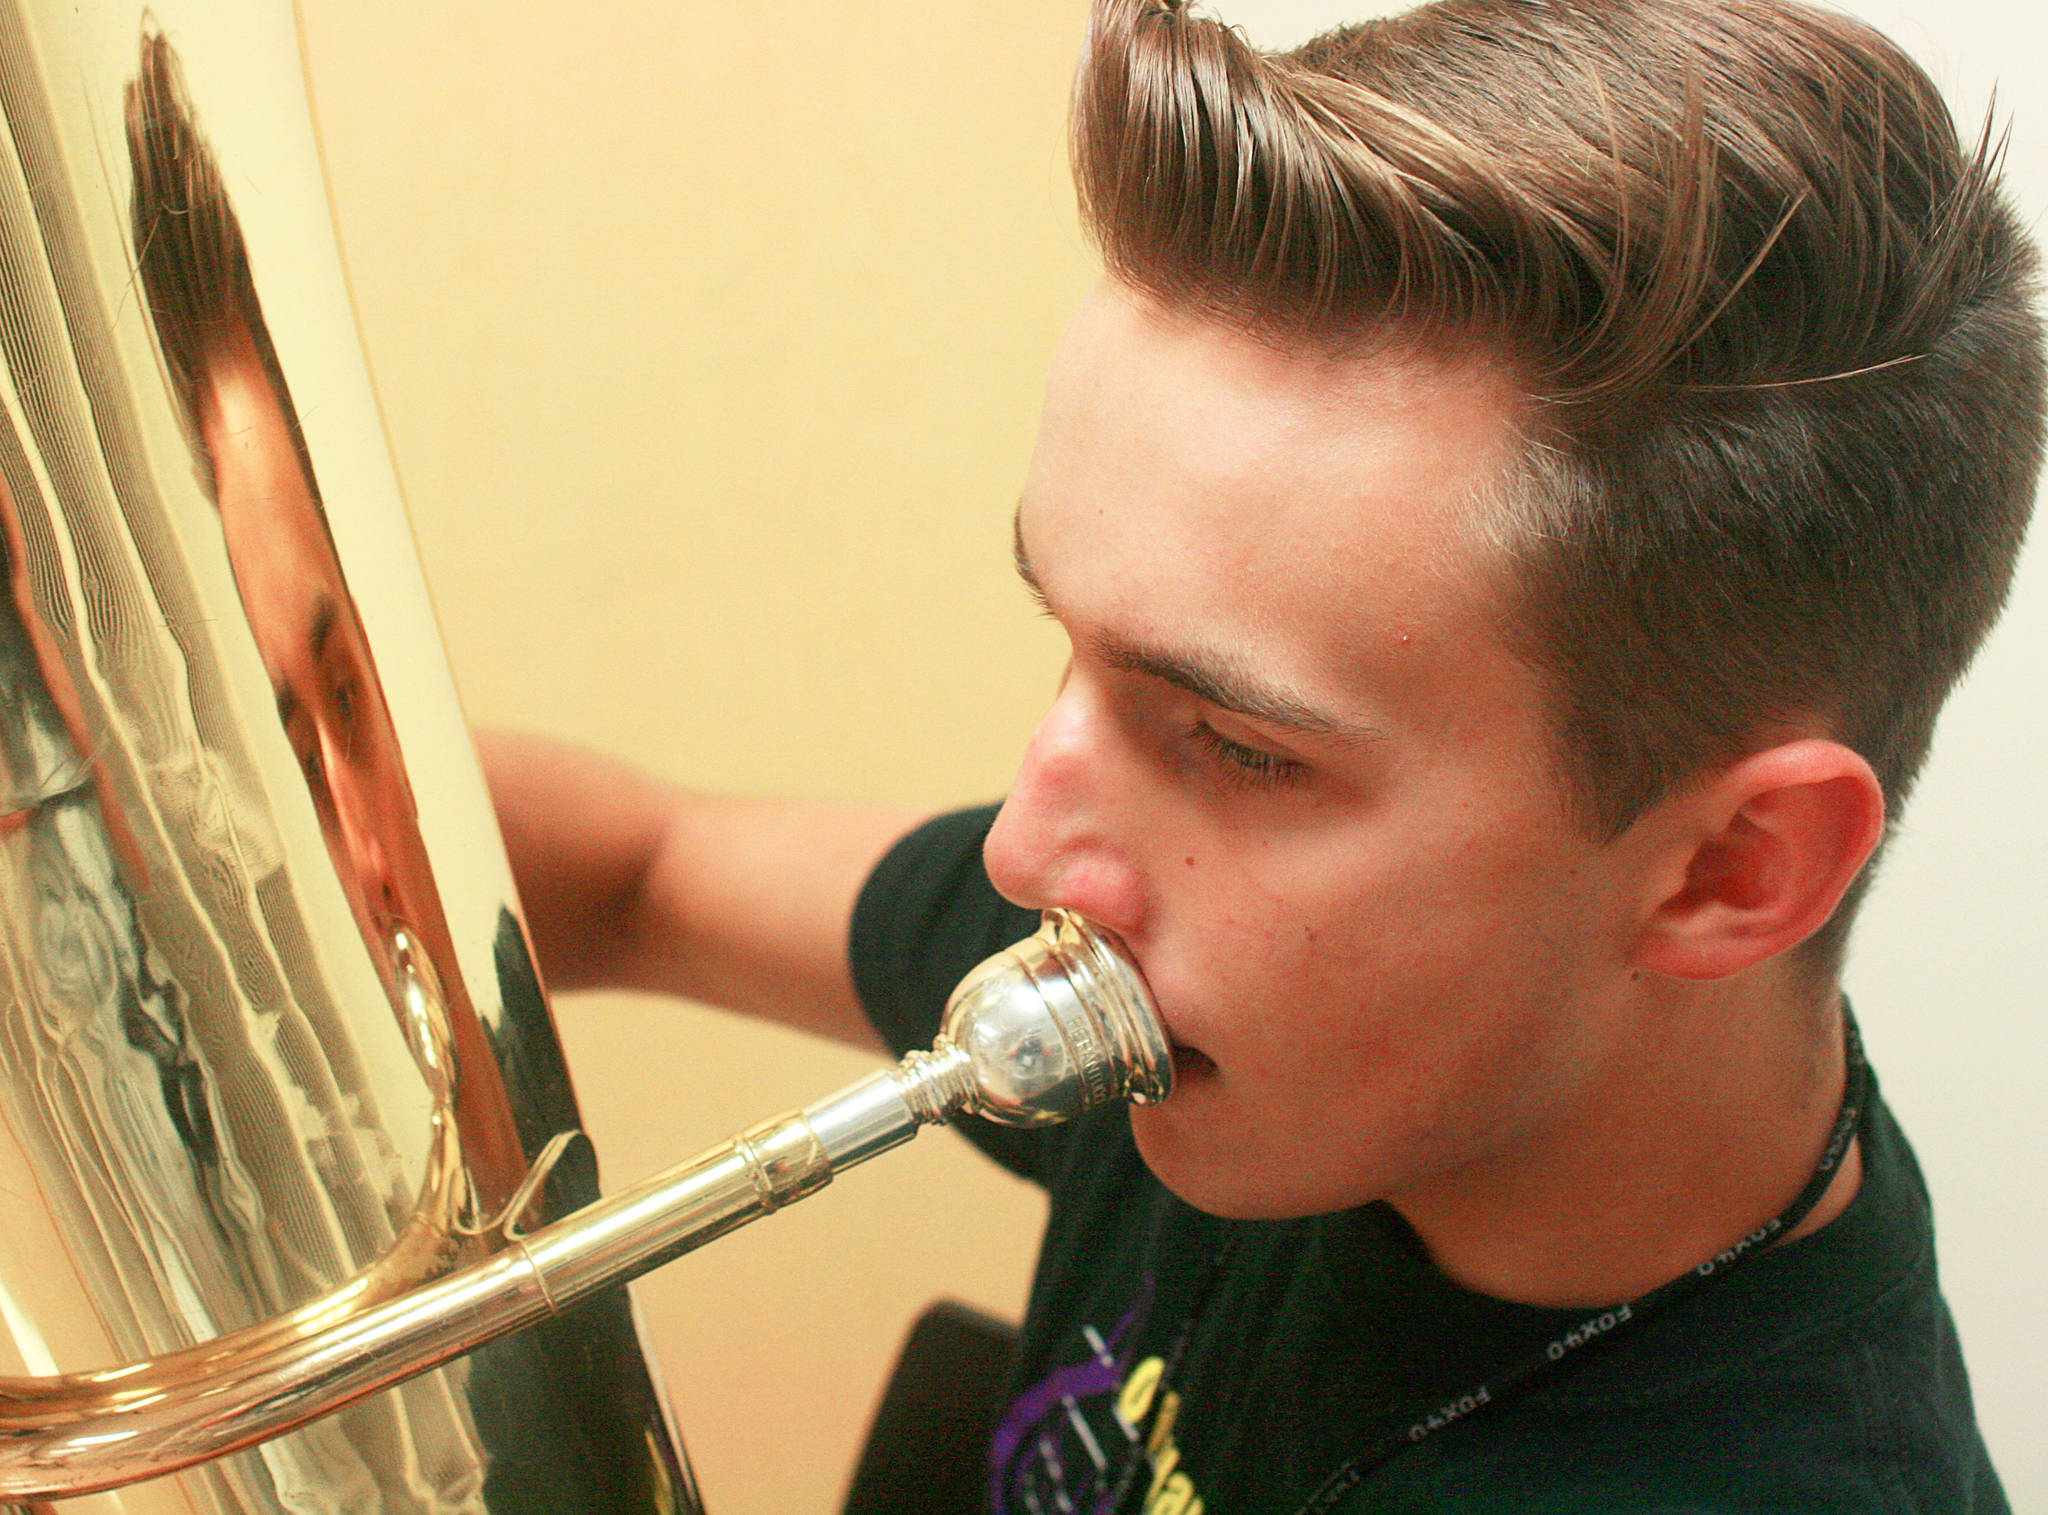 Jordan George, an Oak Harbor High School senior, made this year’s All-Nation Honor Band as a tubist. Photo by Daniel Warn/Whidbey News Times